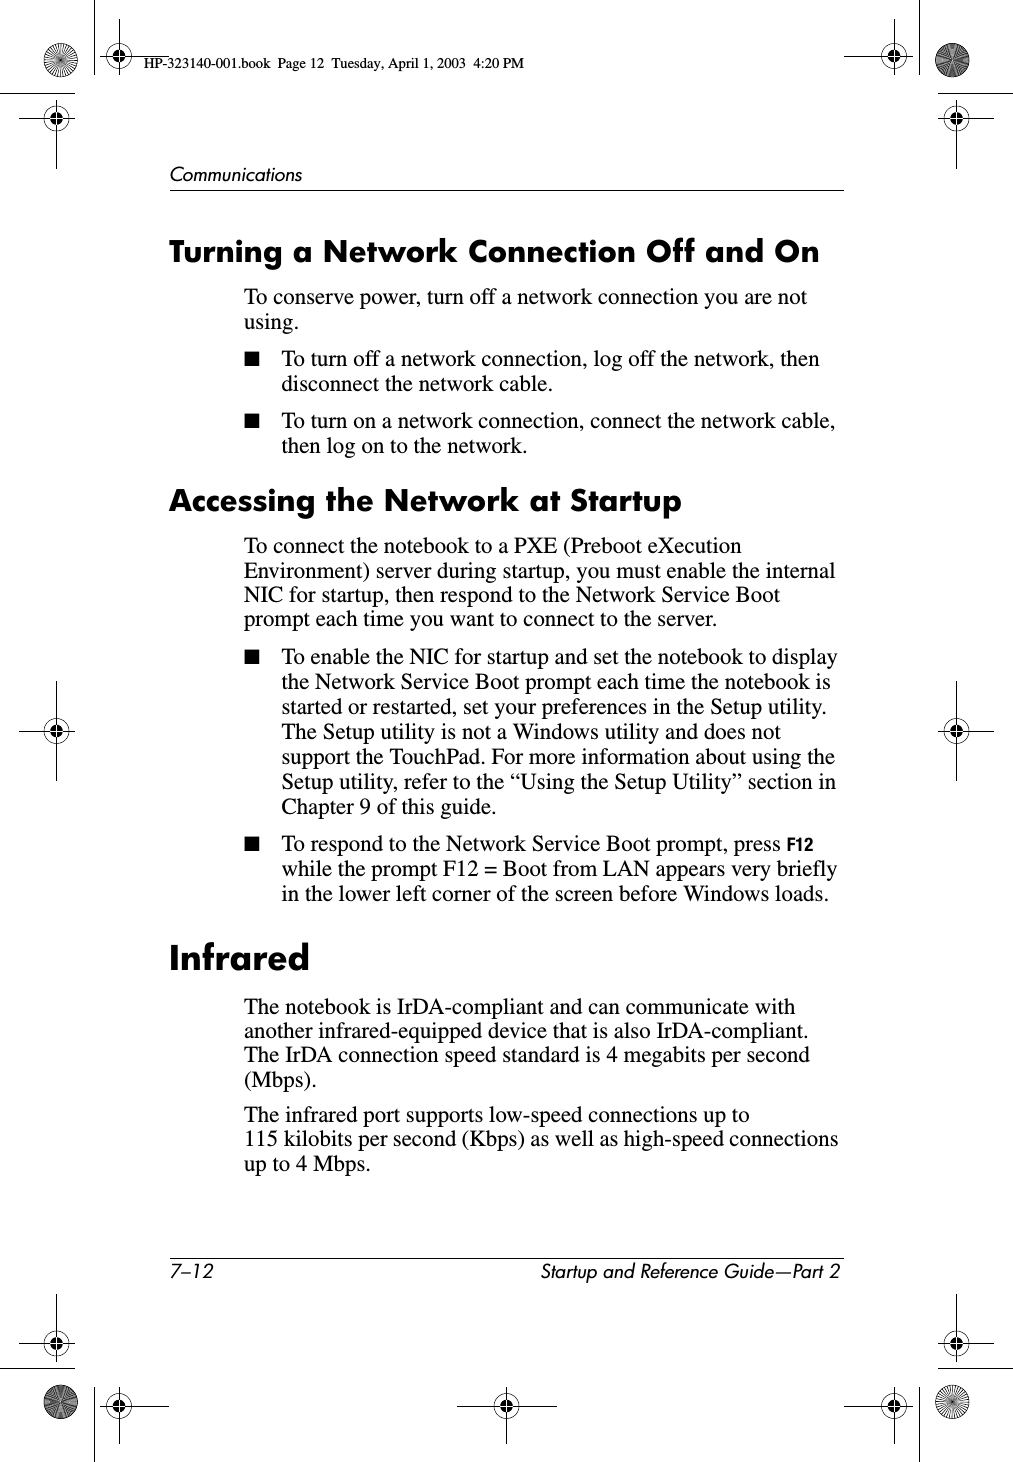 7–12 Startup and Reference Guide—Part 2CommunicationsTurning a Network Connection Off and OnTo conserve power, turn off a network connection you are not using.■To turn off a network connection, log off the network, then disconnect the network cable.■To turn on a network connection, connect the network cable, then log on to the network.Accessing the Network at StartupTo connect the notebook to a PXE (Preboot eXecution Environment) server during startup, you must enable the internal NIC for startup, then respond to the Network Service Boot prompt each time you want to connect to the server.■To enable the NIC for startup and set the notebook to display the Network Service Boot prompt each time the notebook is started or restarted, set your preferences in the Setup utility. The Setup utility is not a Windows utility and does not support the TouchPad. For more information about using the Setup utility, refer to the “Using the Setup Utility” section in Chapter 9 of this guide.■To respond to the Network Service Boot prompt, press F12while the prompt F12 = Boot from LAN appears very briefly in the lower left corner of the screen before Windows loads.InfraredThe notebook is IrDA-compliant and can communicate with another infrared-equipped device that is also IrDA-compliant. The IrDA connection speed standard is 4 megabits per second (Mbps).The infrared port supports low-speed connections up to 115 kilobits per second (Kbps) as well as high-speed connections up to 4 Mbps.HP-323140-001.book  Page 12  Tuesday, April 1, 2003  4:20 PM